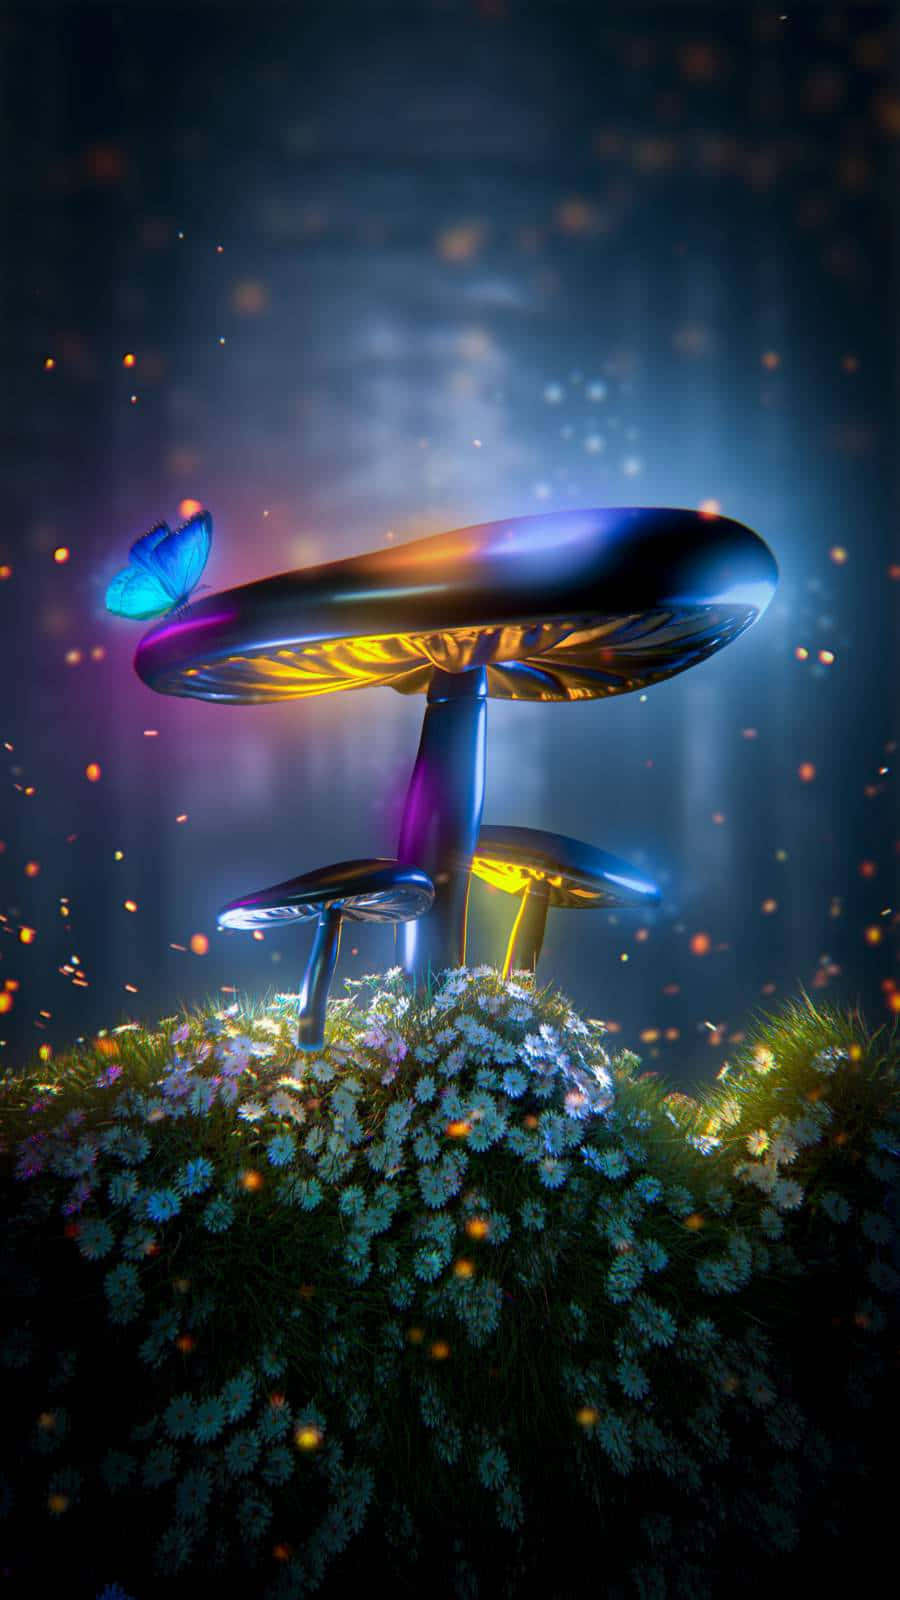 A unique perspective on the beauty of trippy mushrooms" Wallpaper